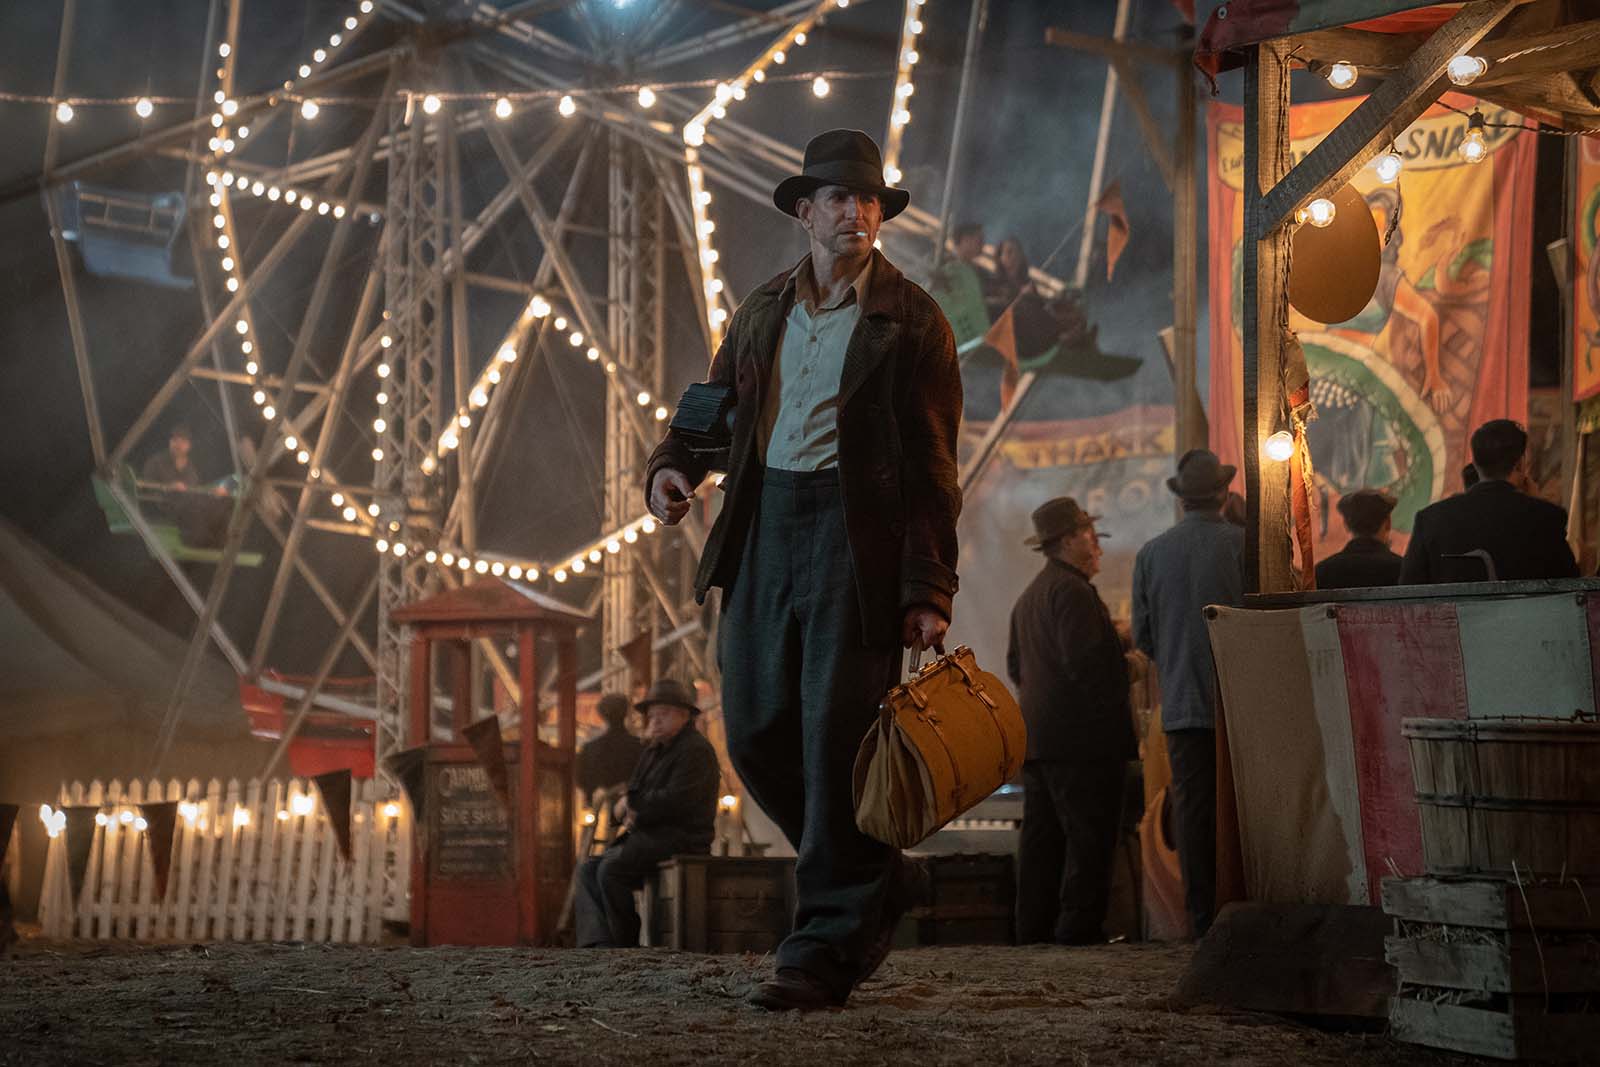 Stanton Carlisle looks for work in a traveling carnival. Image © Searchlight Pictures